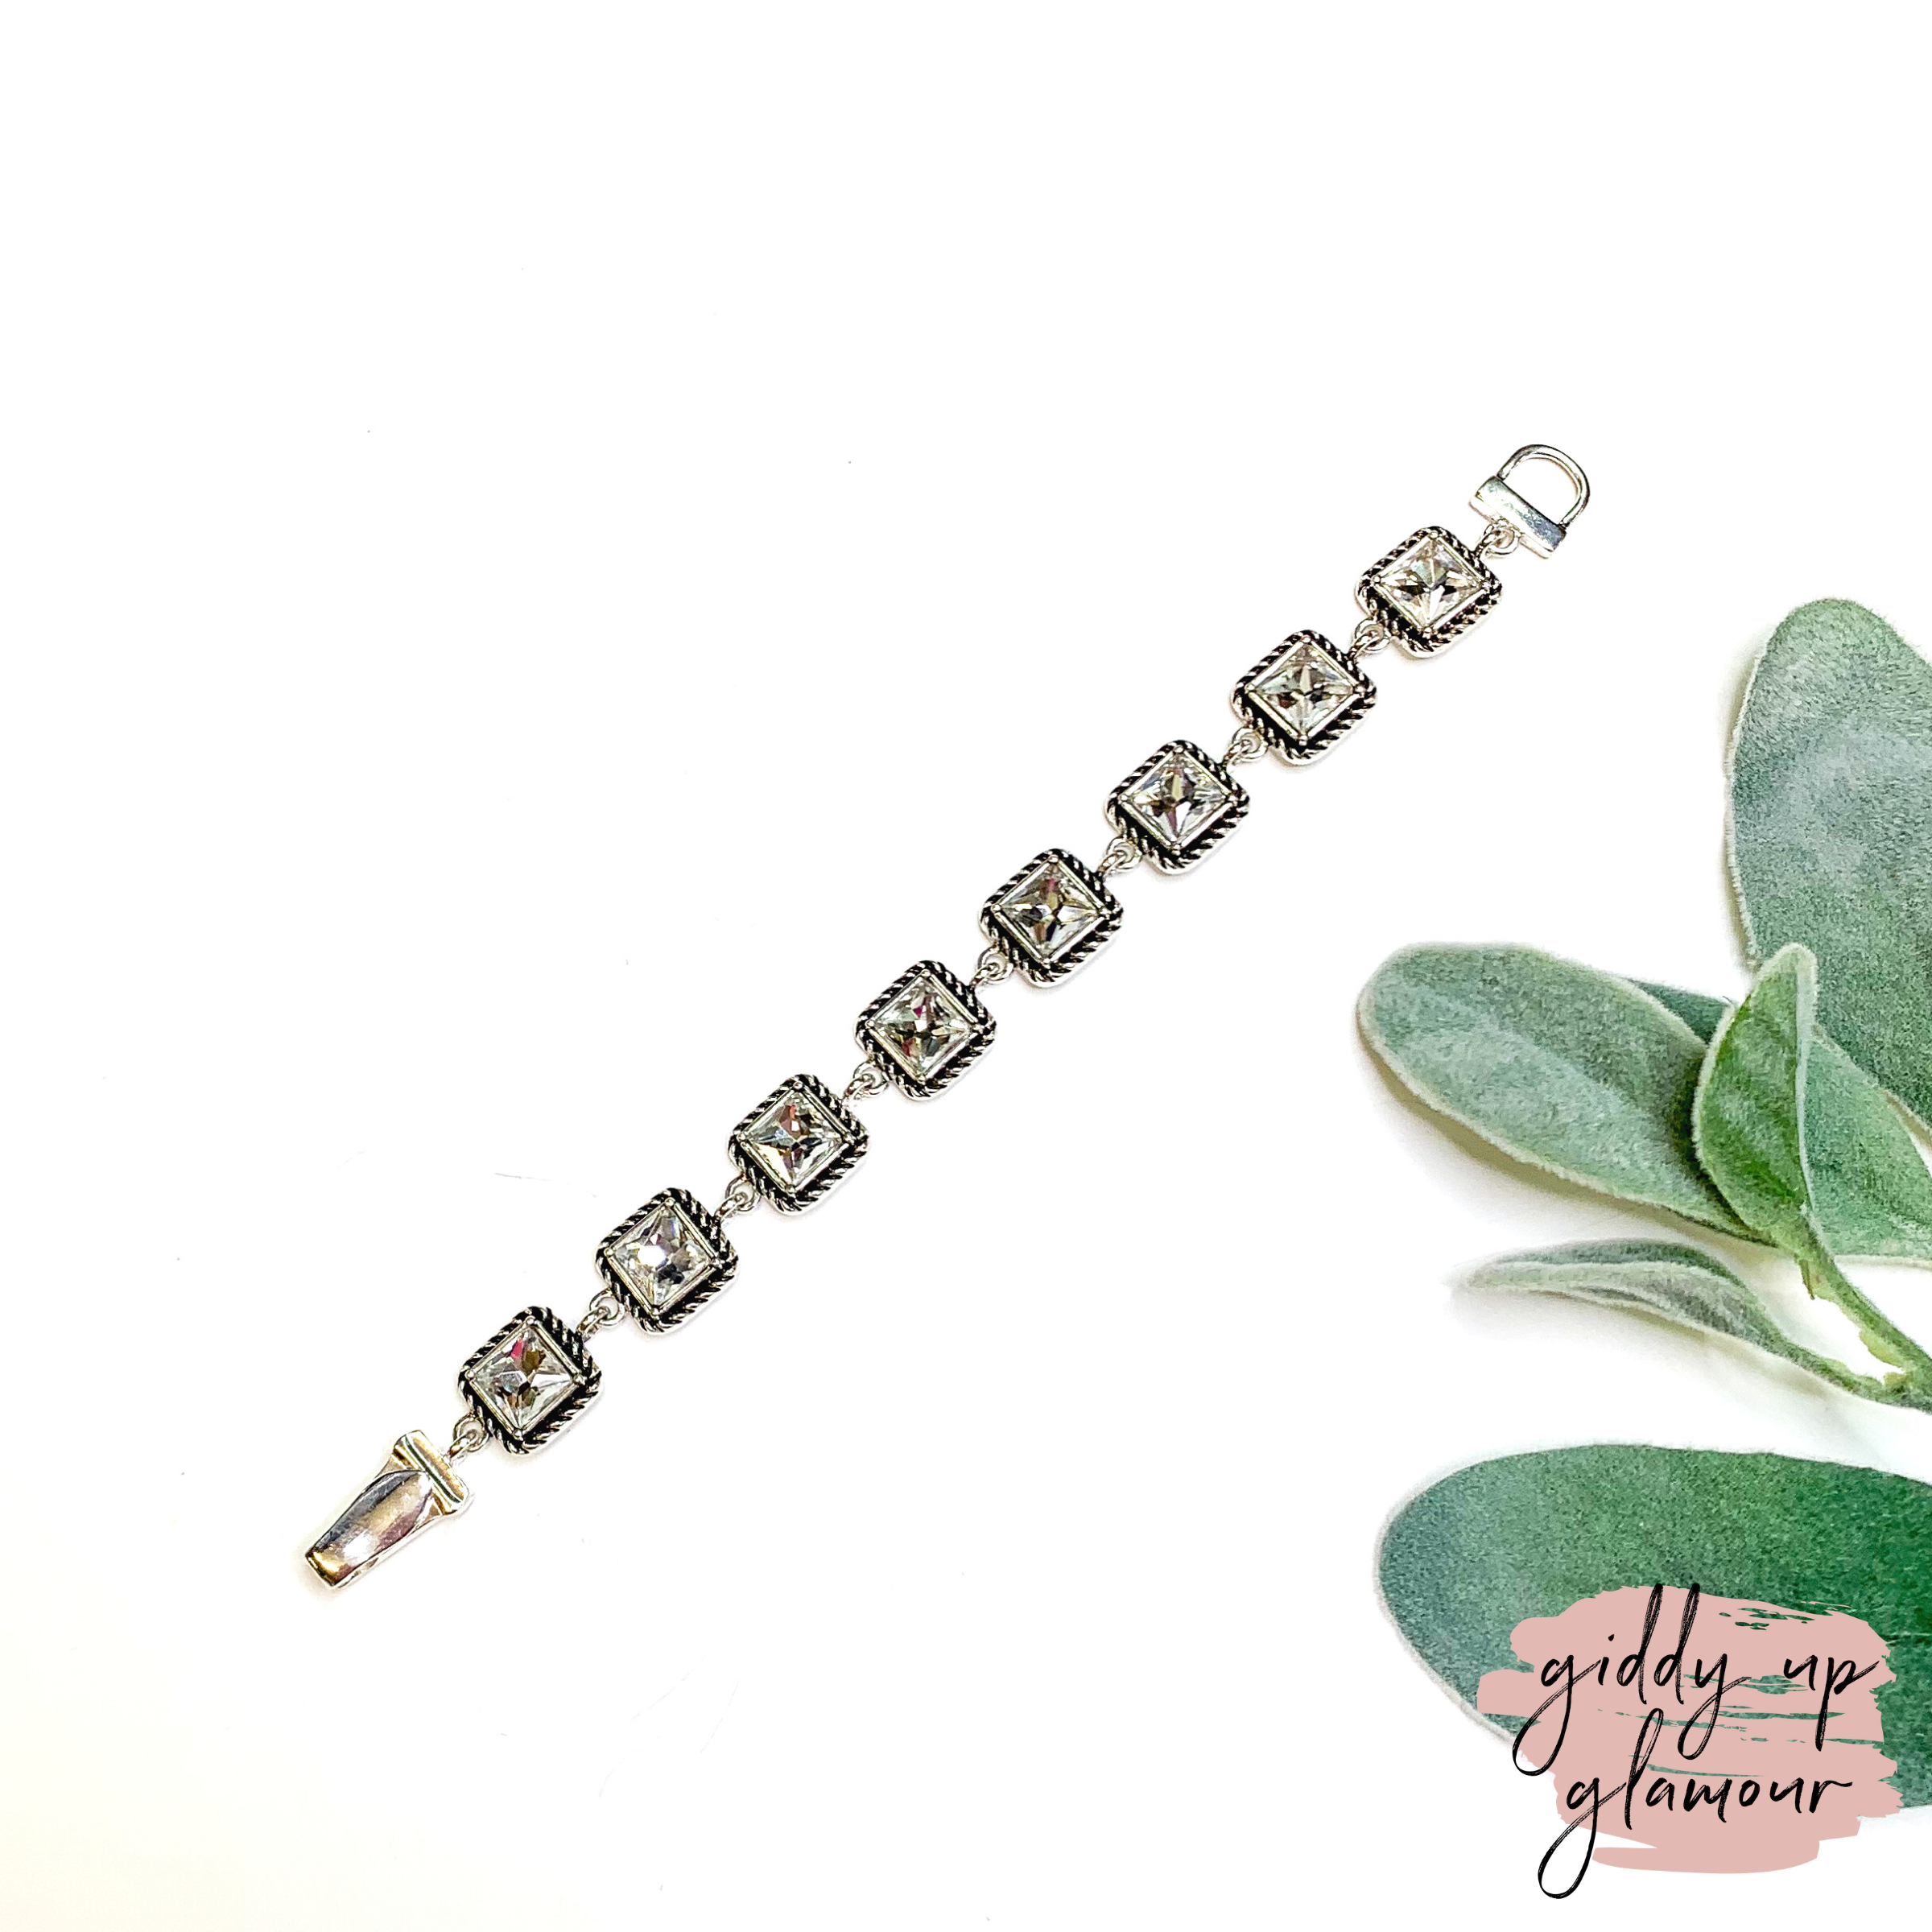 Link Bracelet with Square Crystals in Silver - Giddy Up Glamour Boutique